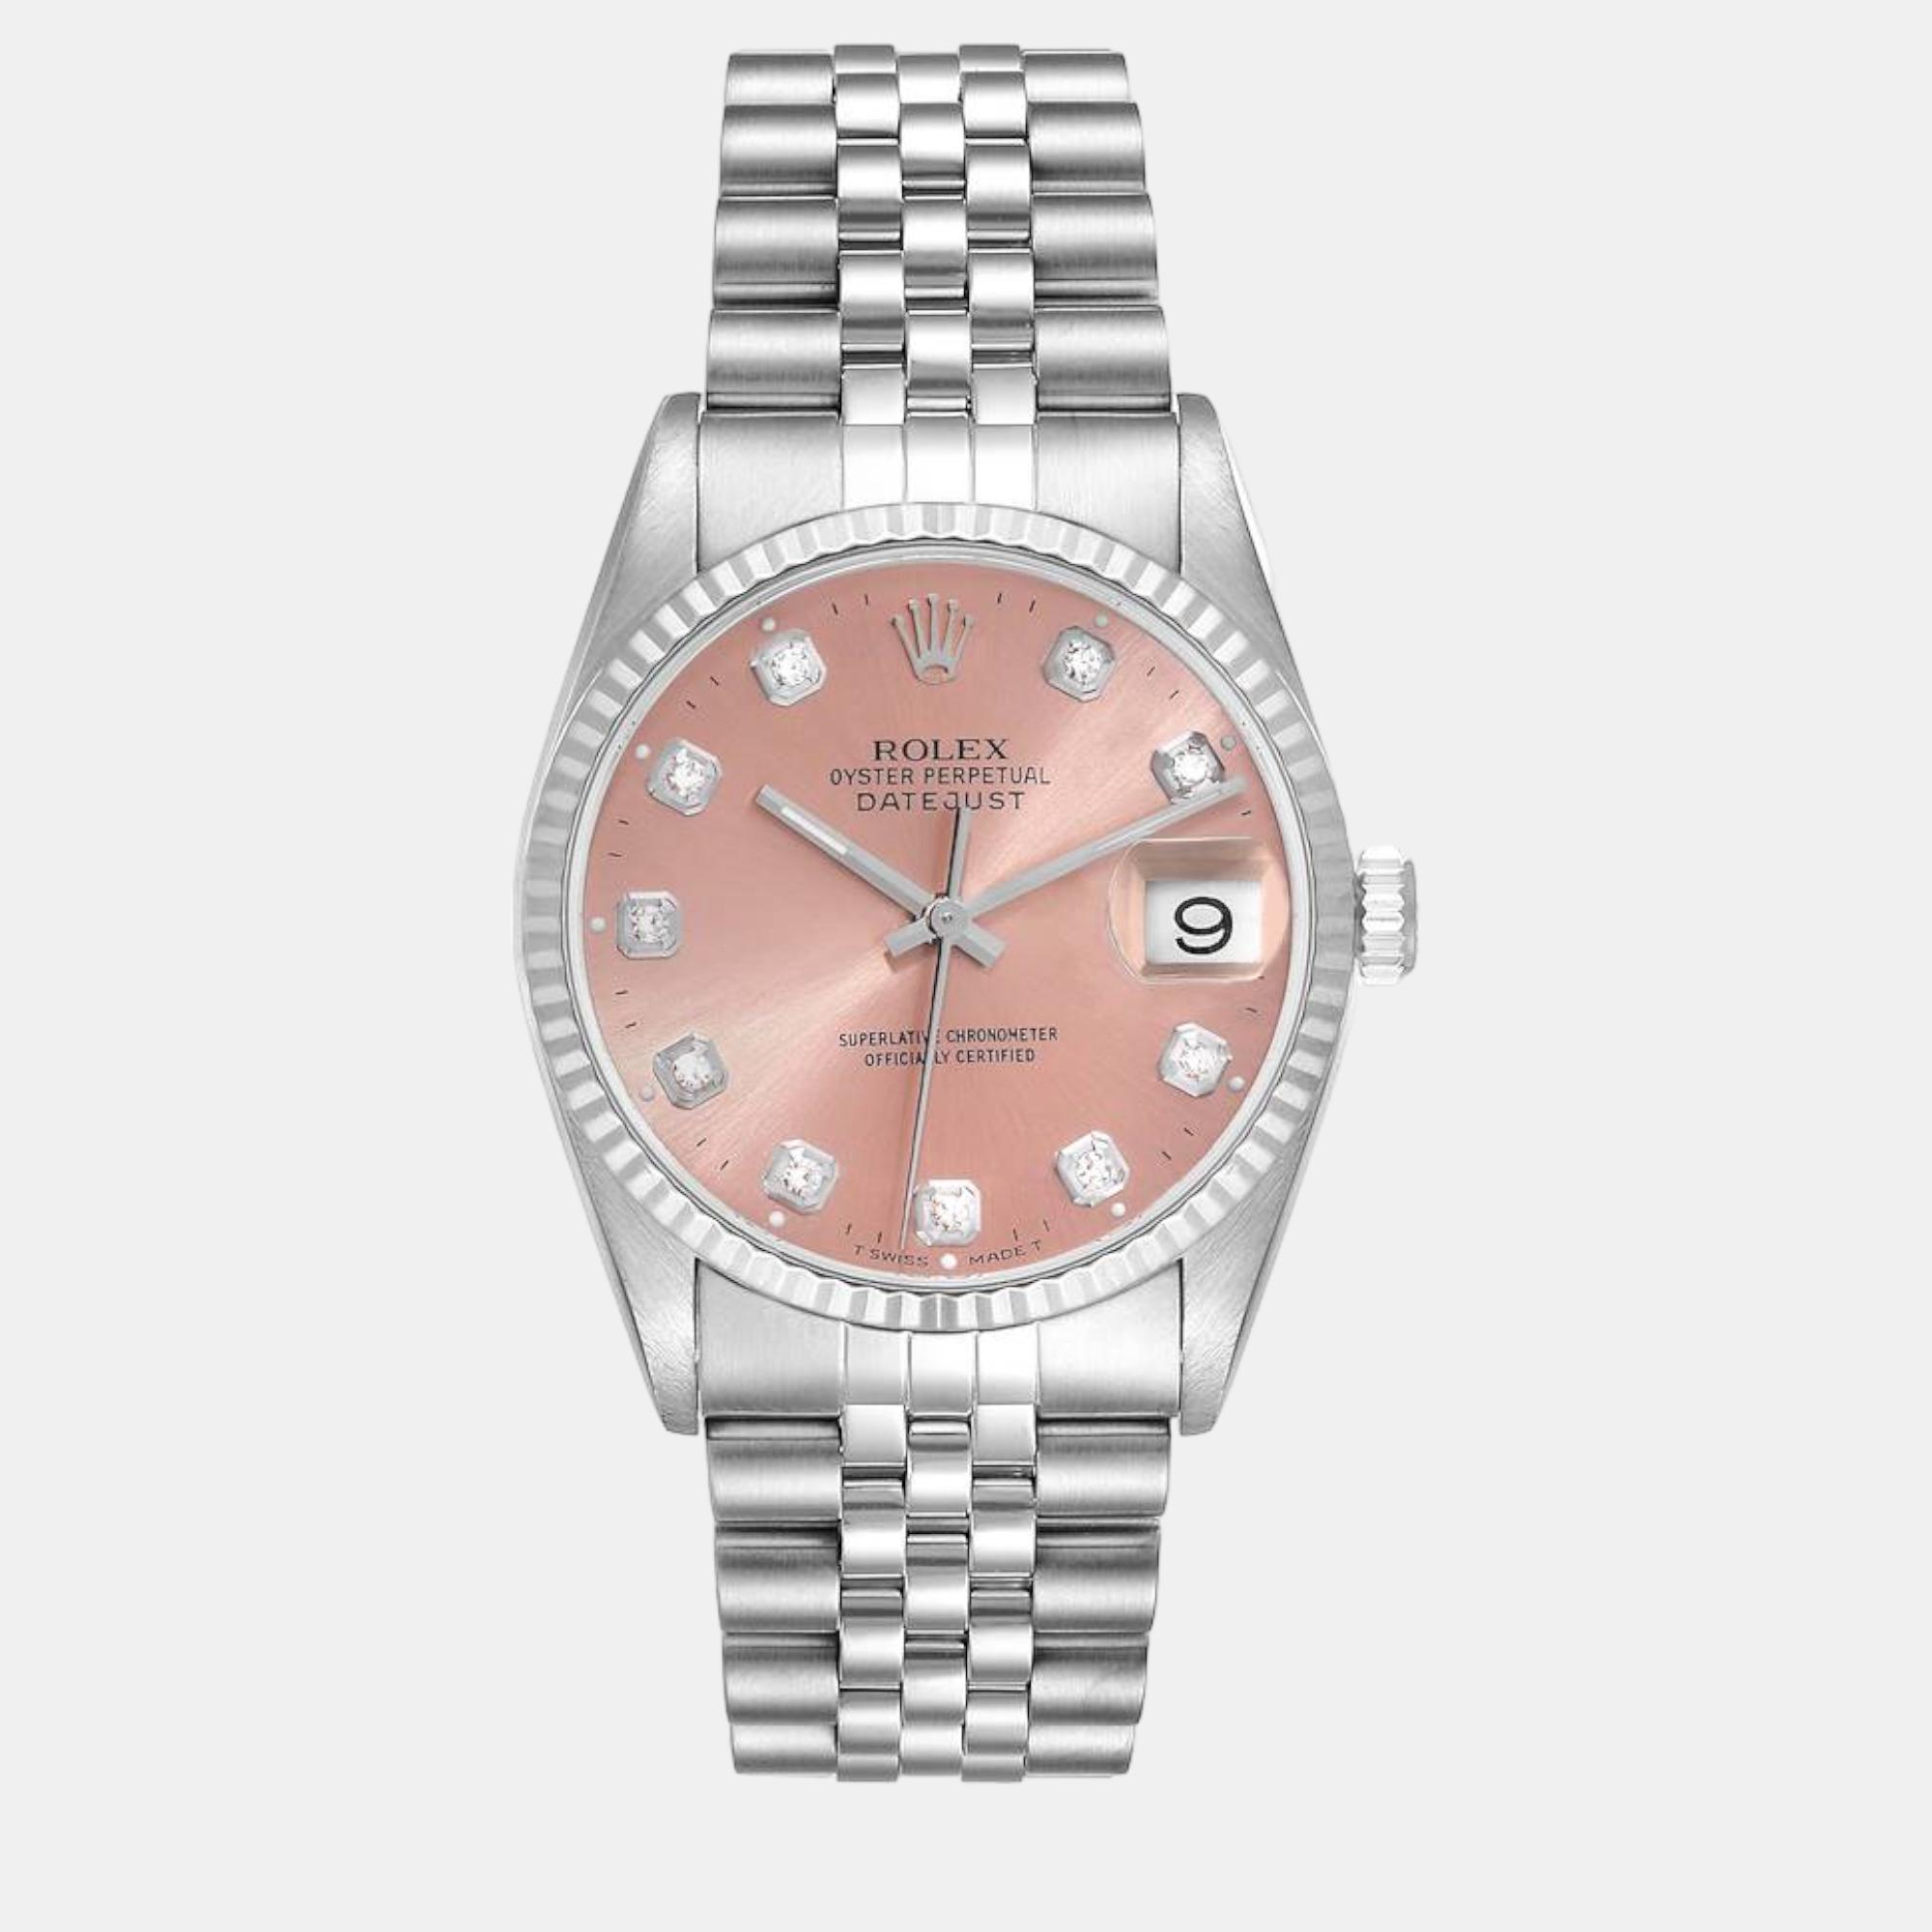 Pre-owned Rolex Datejust Steel White Gold Salmon Diamond Dial Mens Watch 16234 In Pink